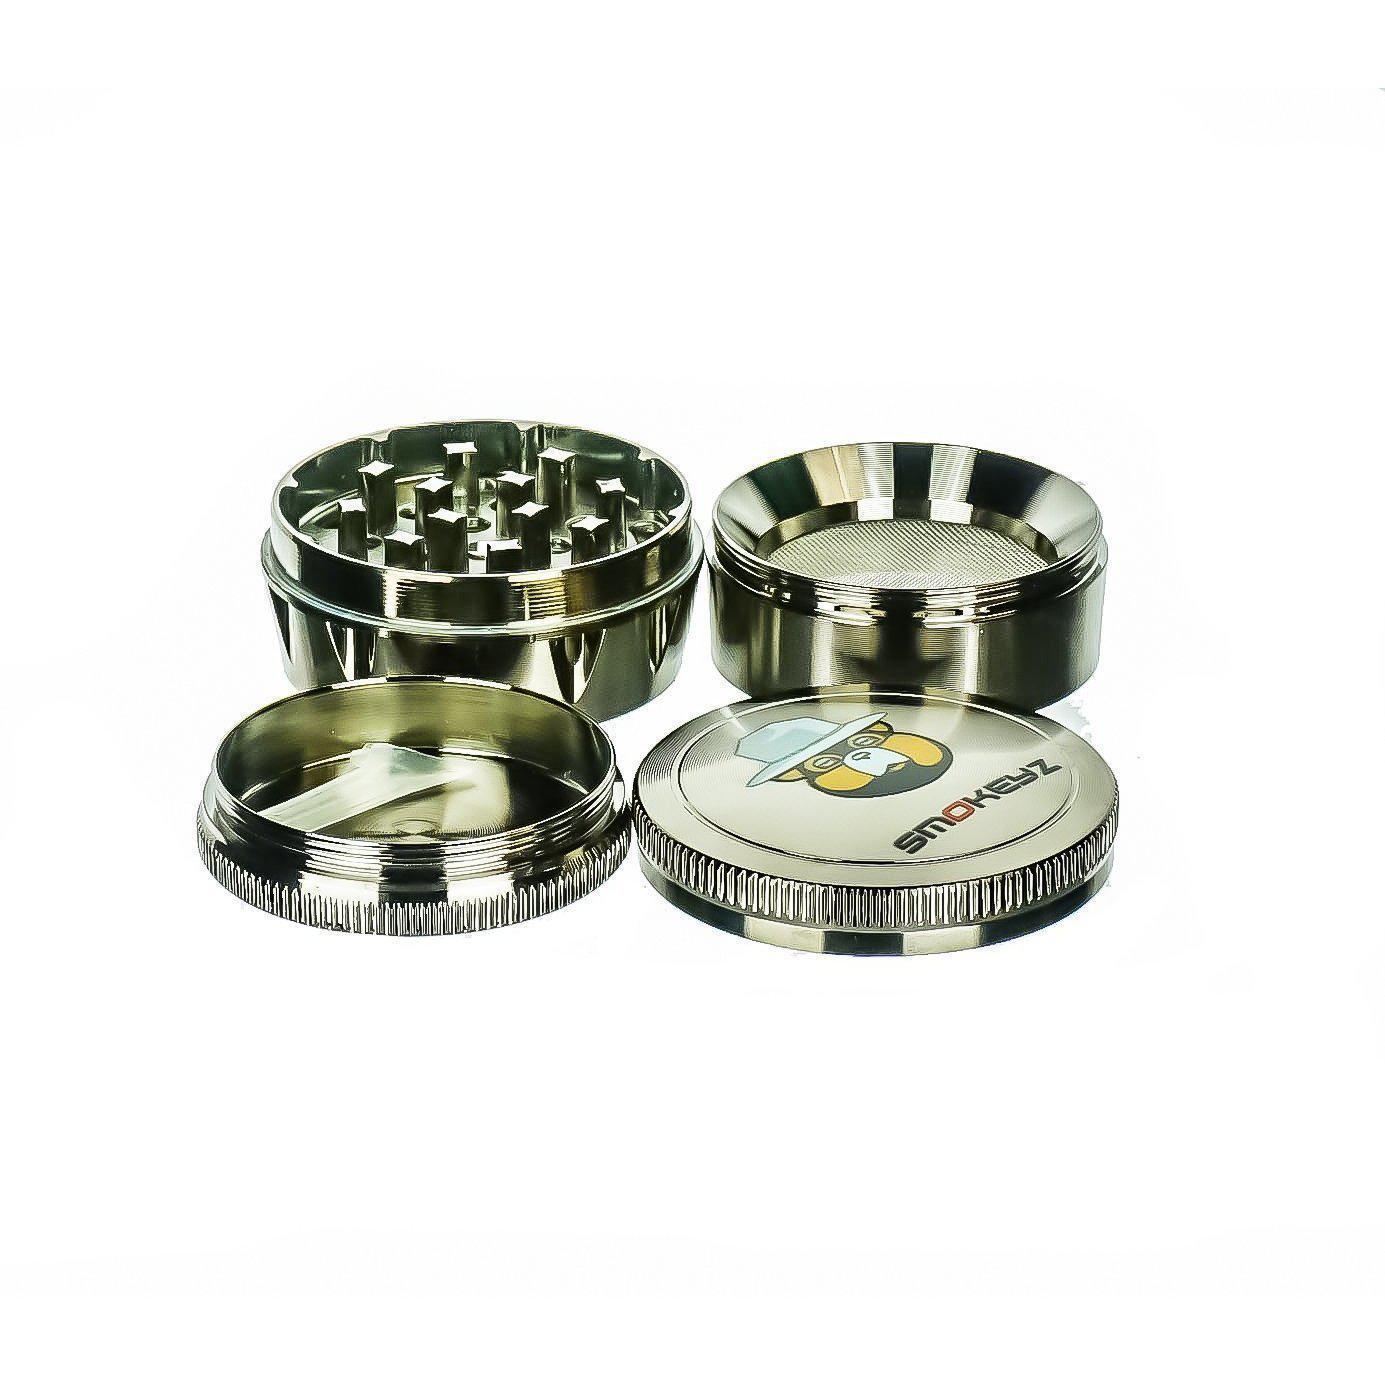 Smokeyz 4 Piece Magnetic Metal Grinder - 3 Sizes Flower Power Packages 